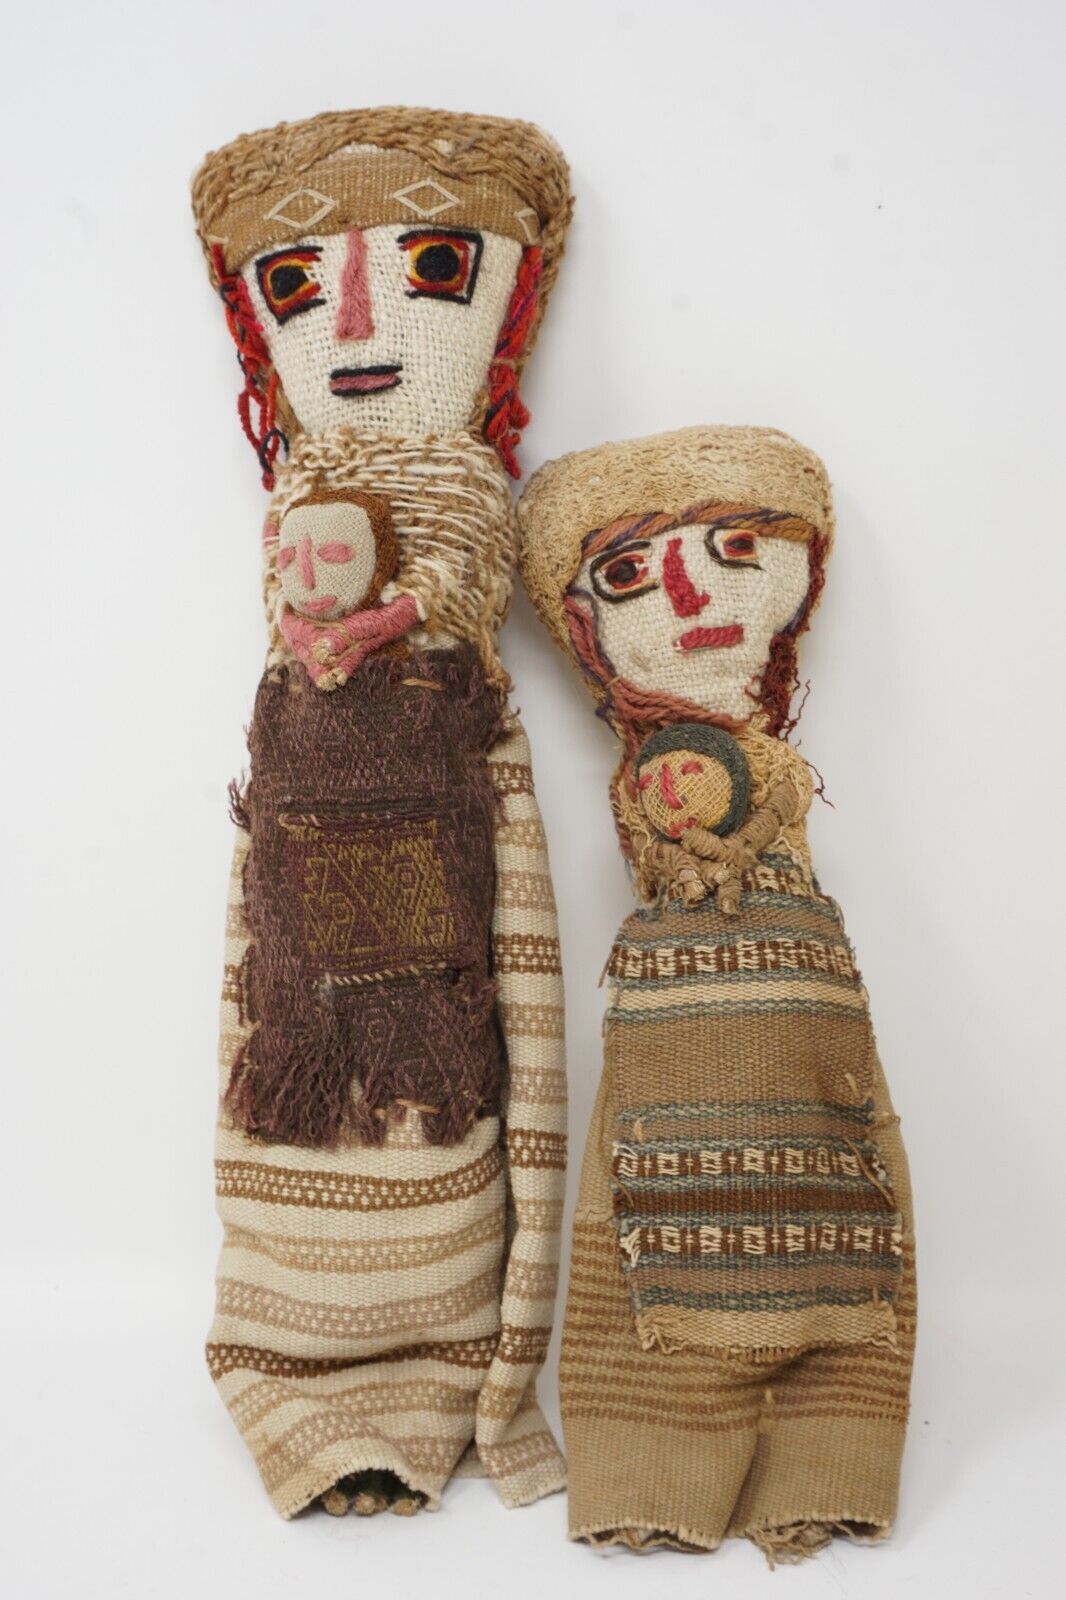 2 Vintage Textile Peruvian Folk Art Chancay Mother With Child Burial Doll